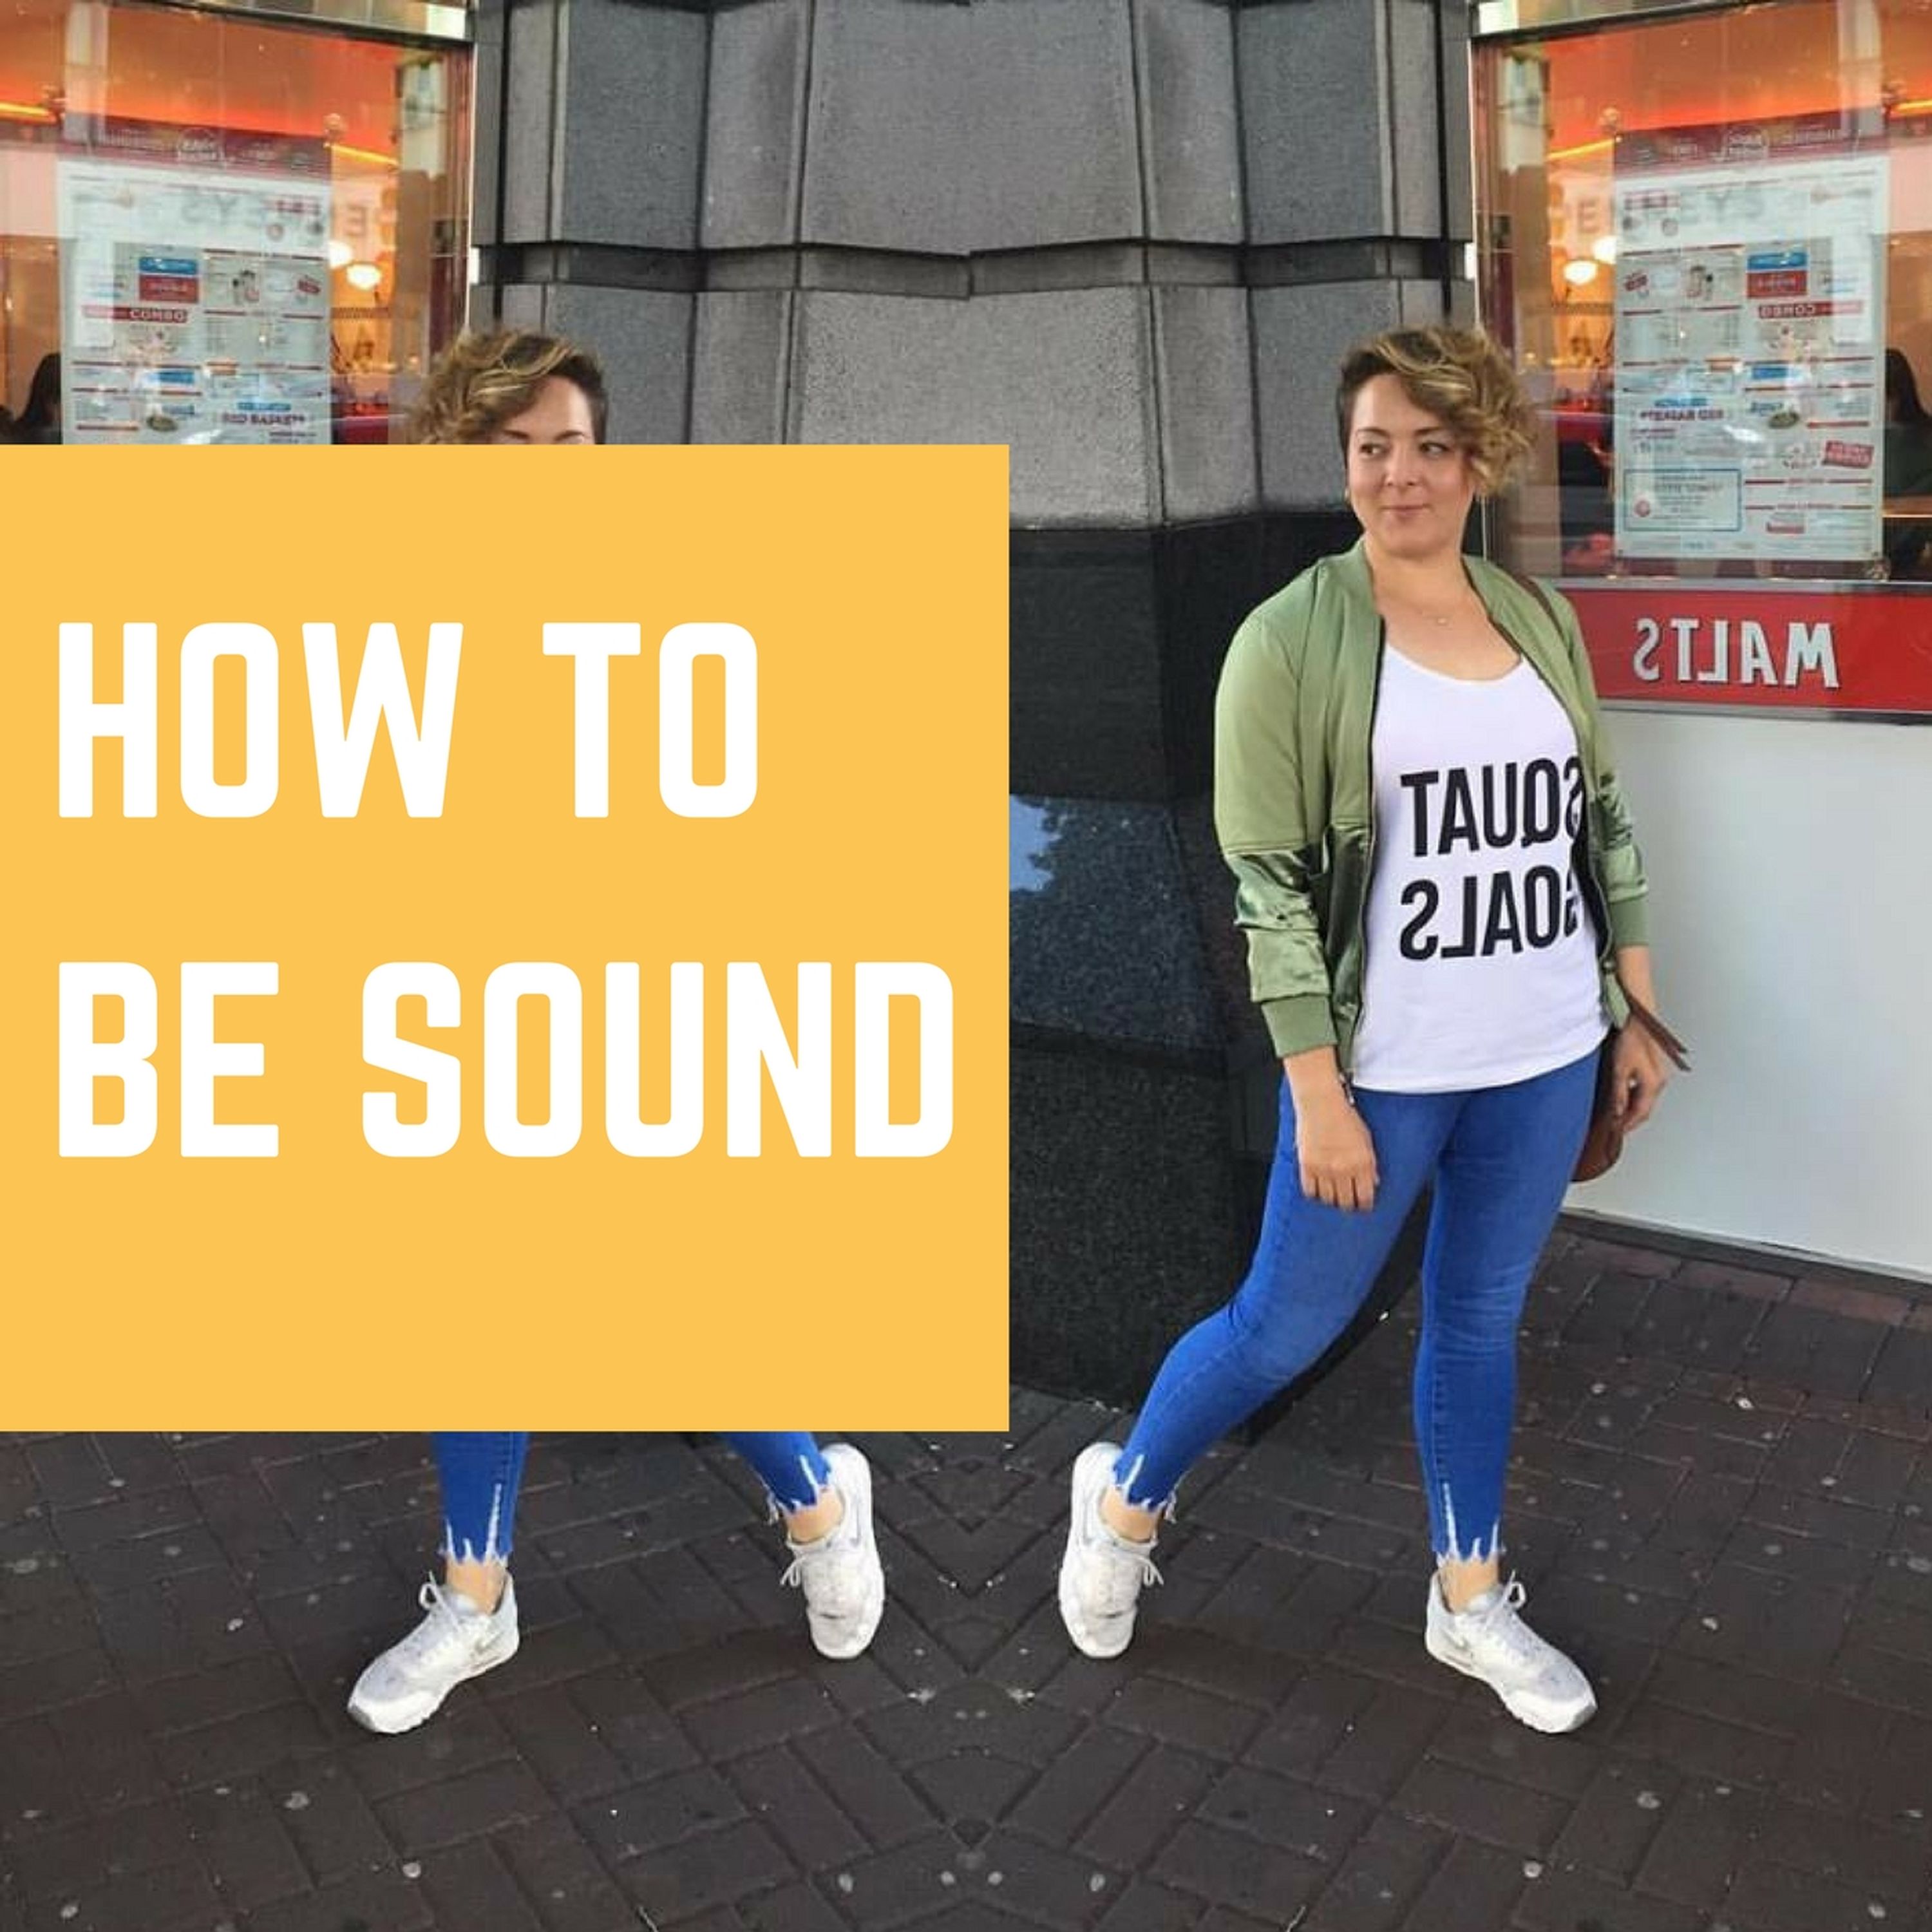 Declan Leavy on how to be sound